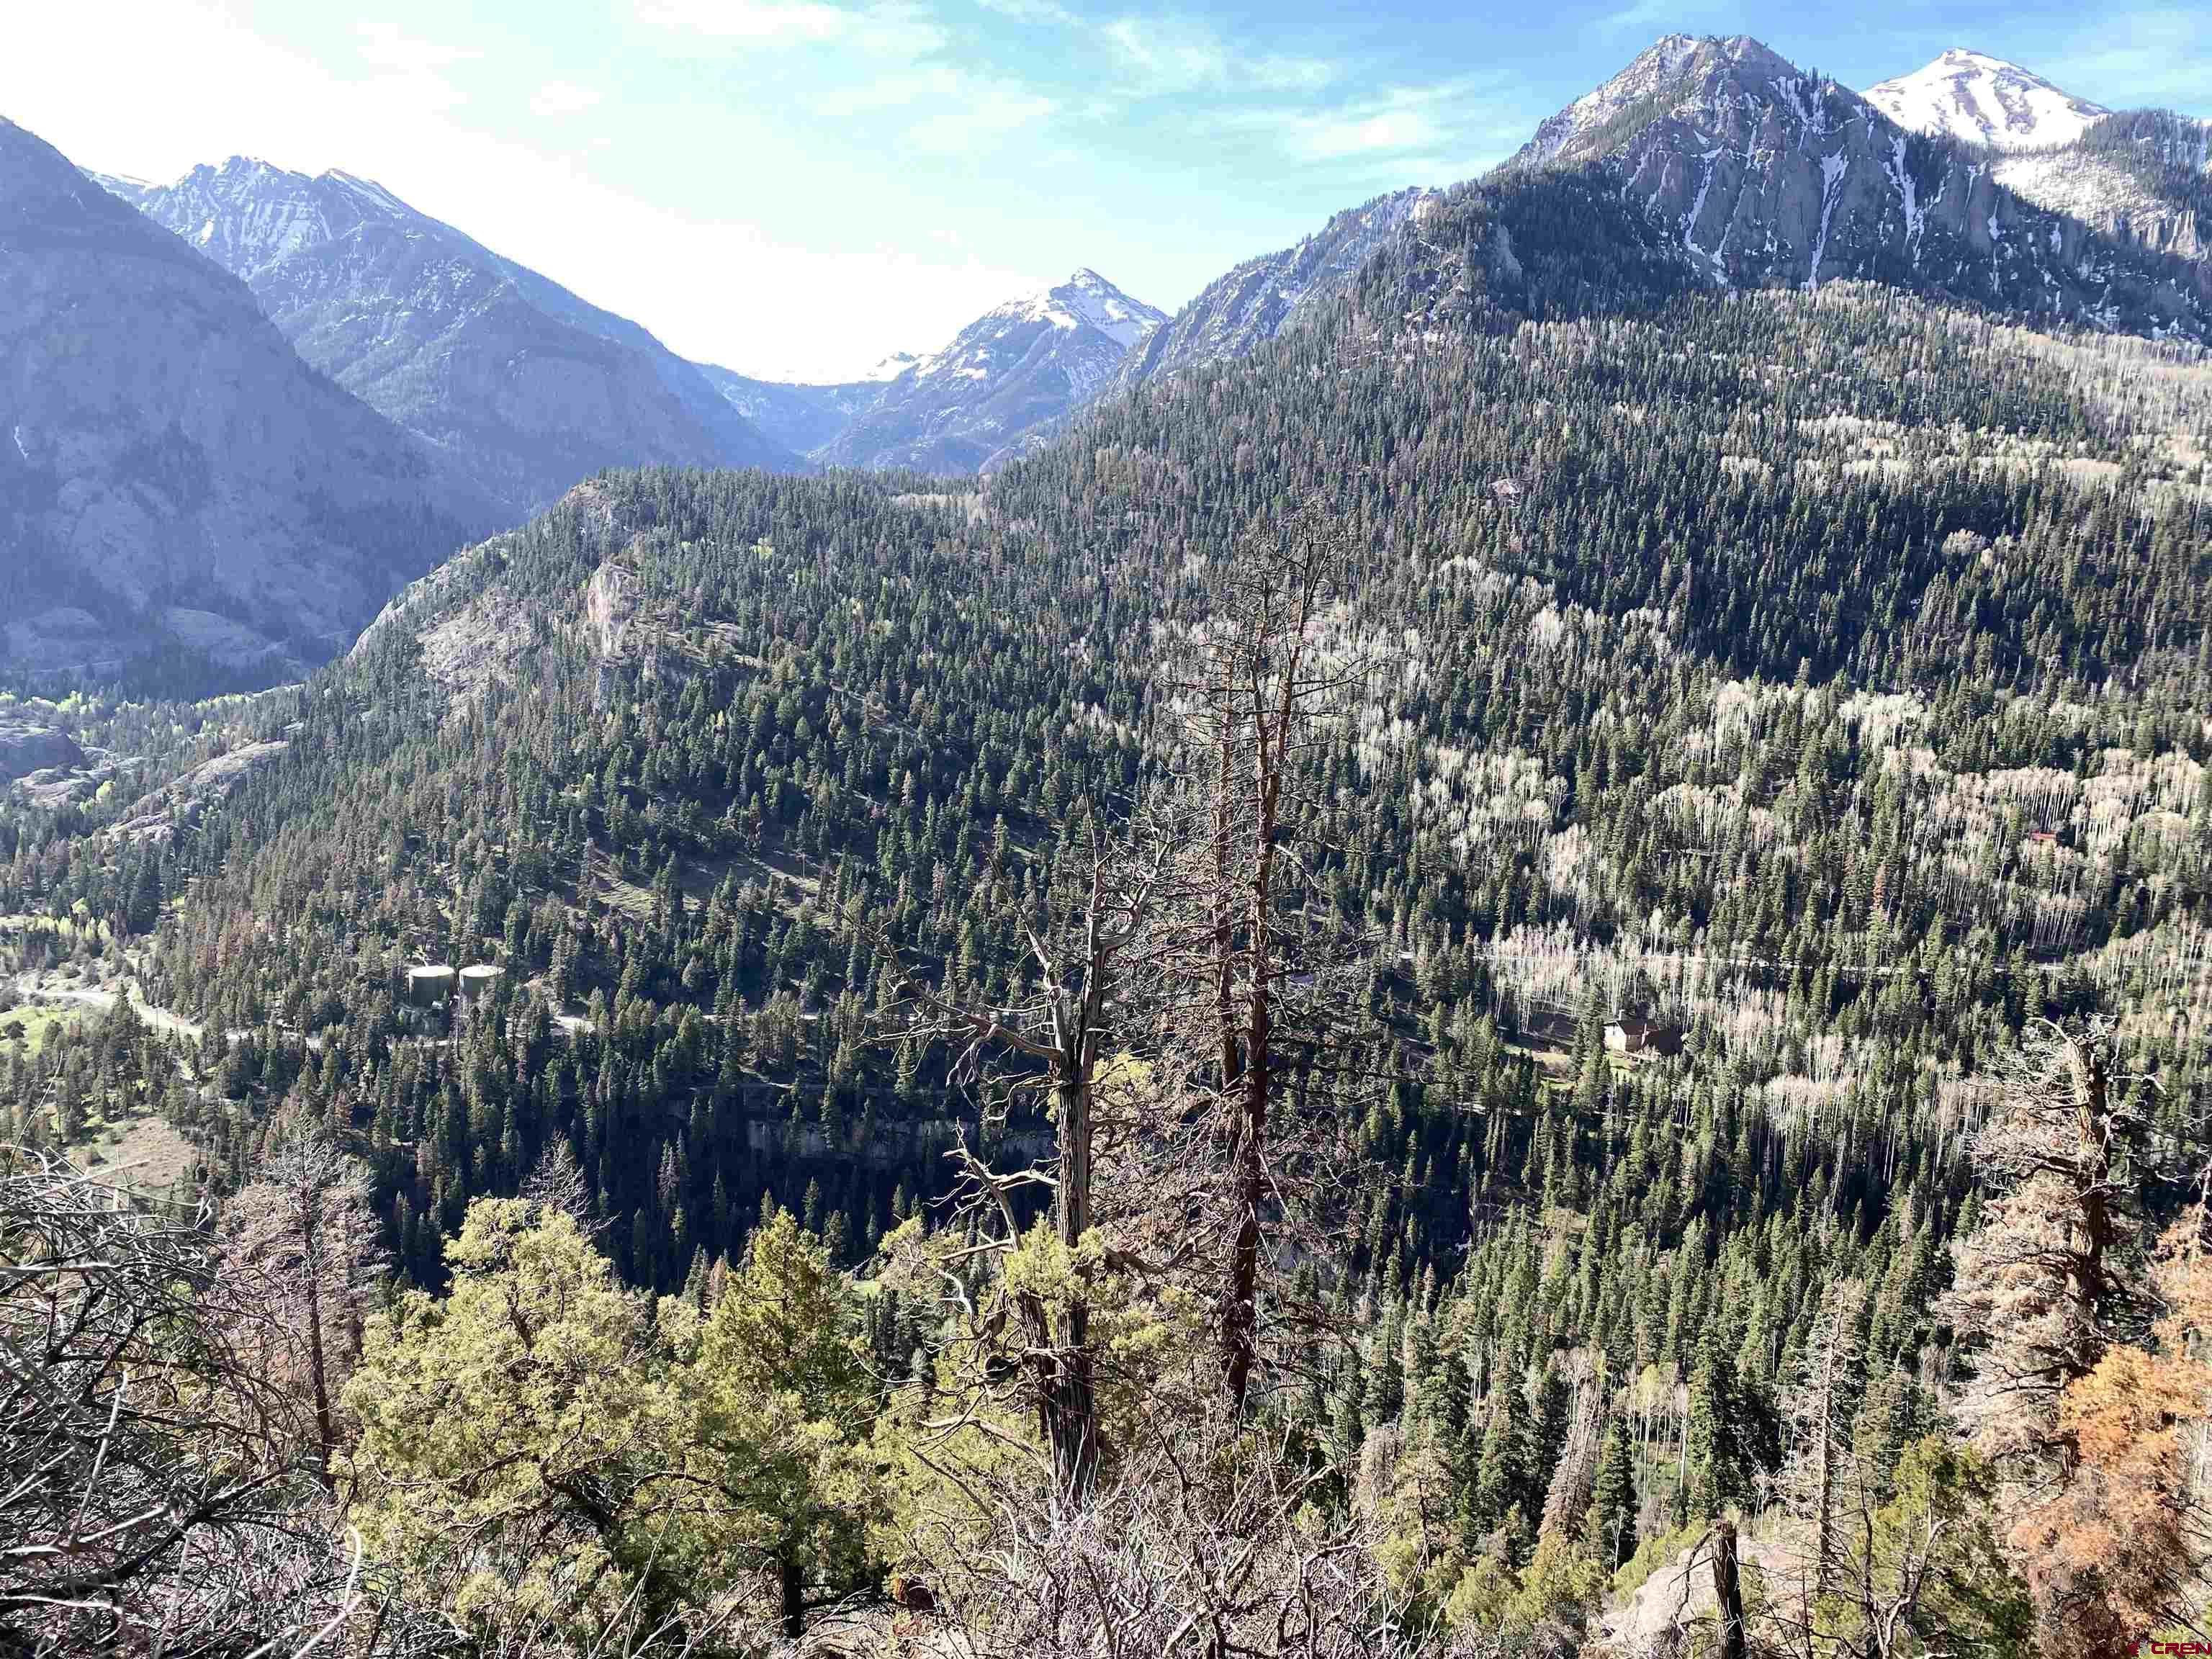 Unique and private acreage parcels and home located directly above the City of Ouray. Outstanding 360 degree views of the surrounding hills and peaks. Call agent for more details.